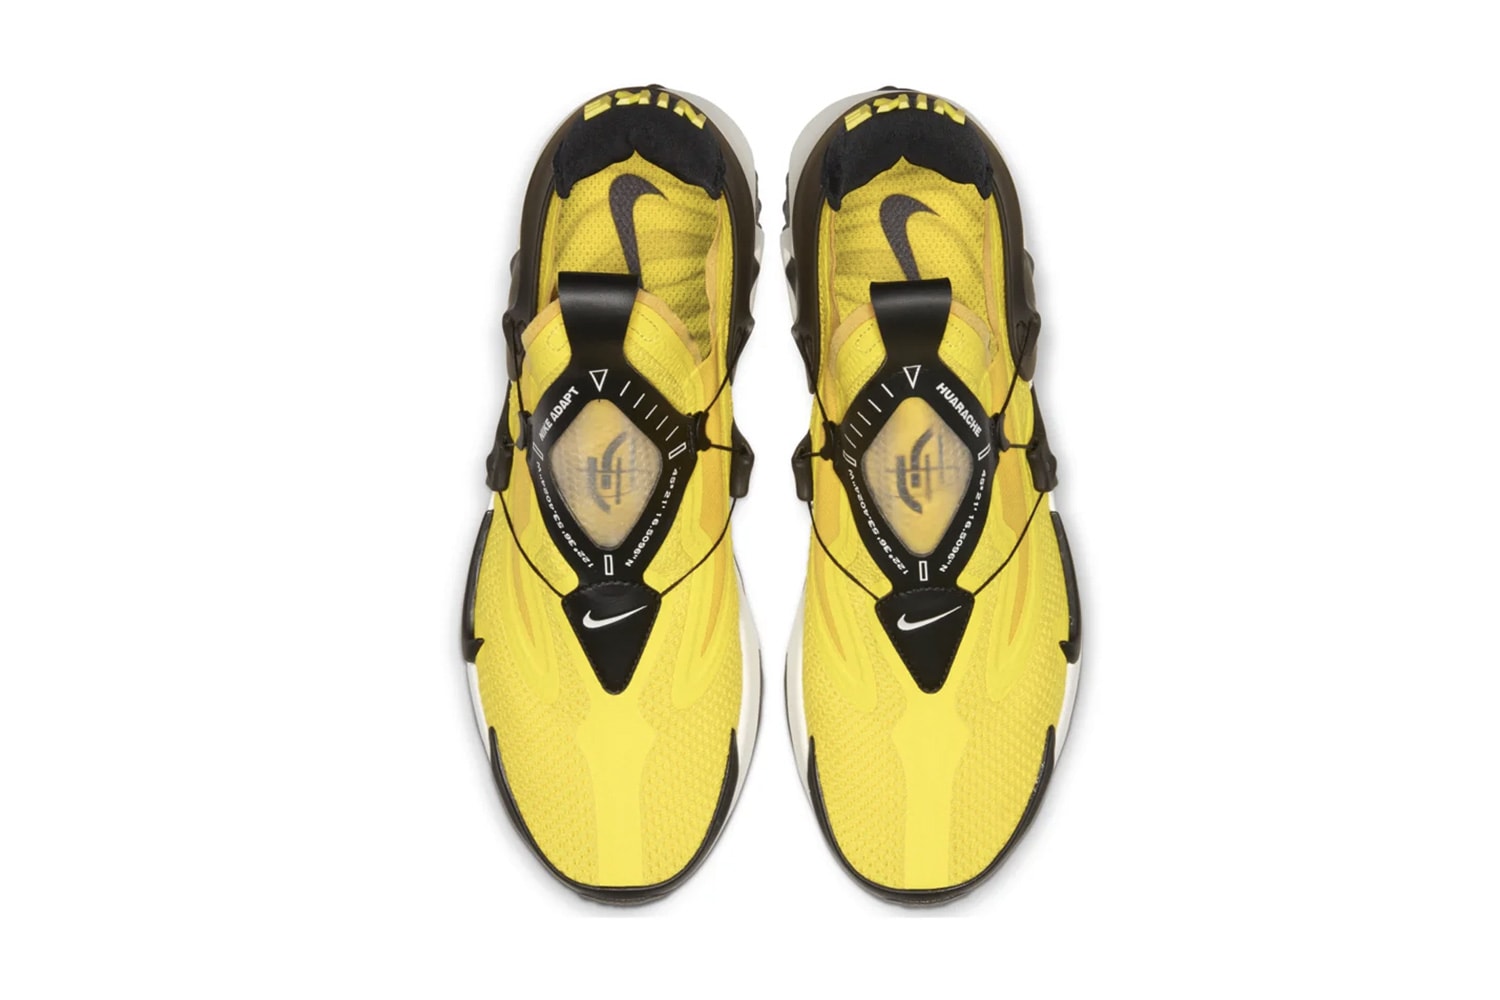 Nike Adapt Huarache Air Huarache Official Images & Release Info "White/Black" "Opti-Yellow" power lacing footwear sneakers release app back to the future shoes 